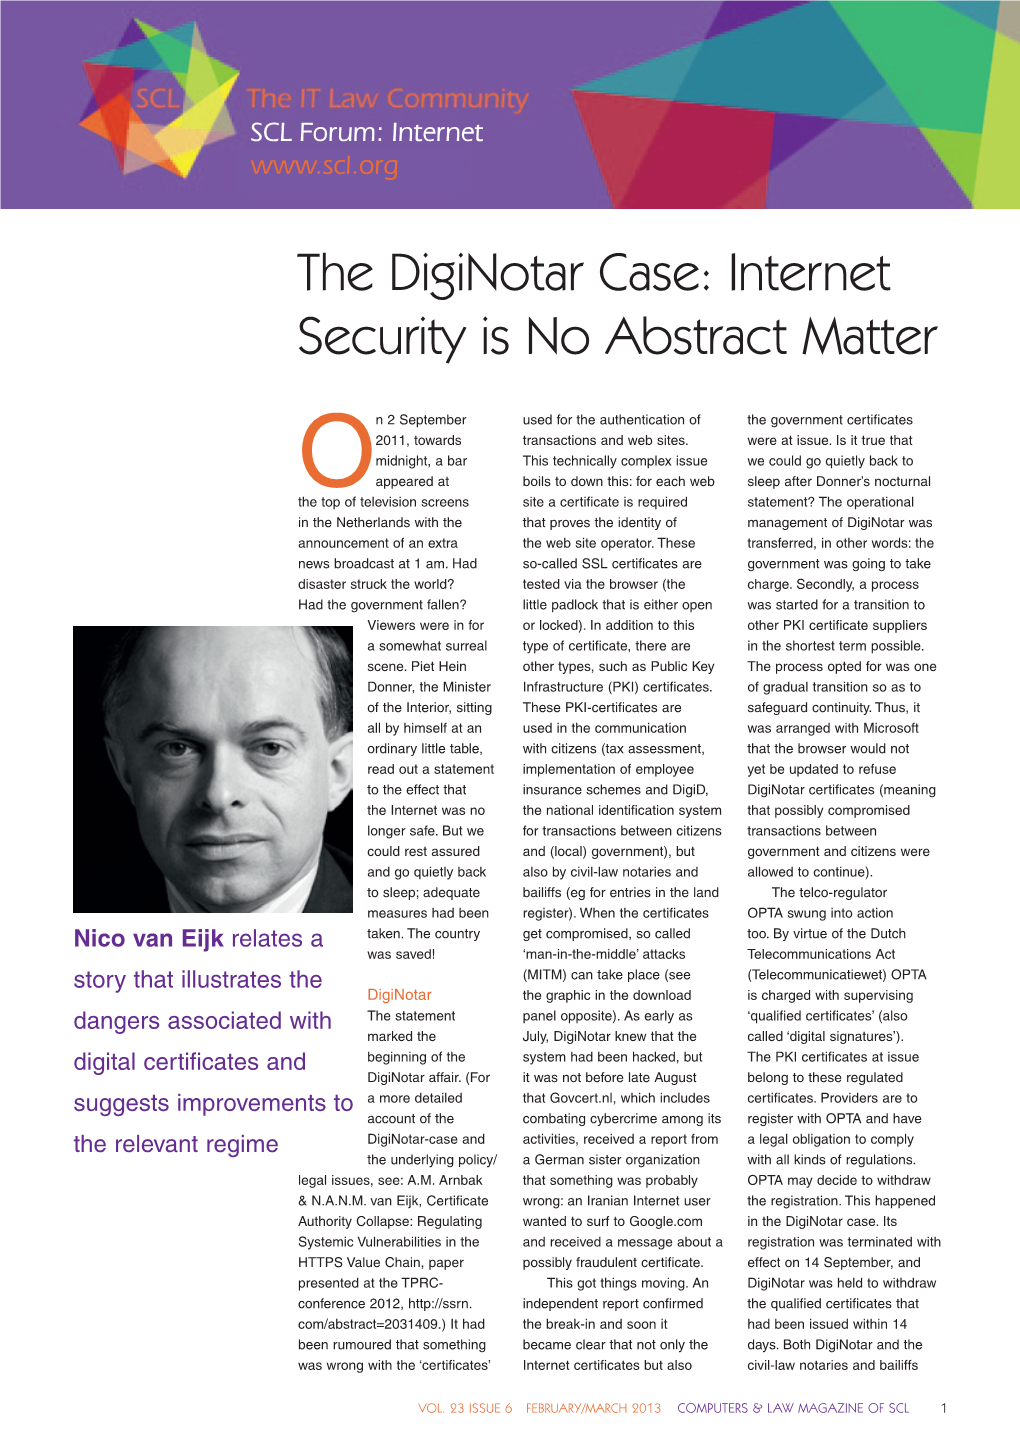 The Diginotar Case: Internet Security Is No Abstract Matter